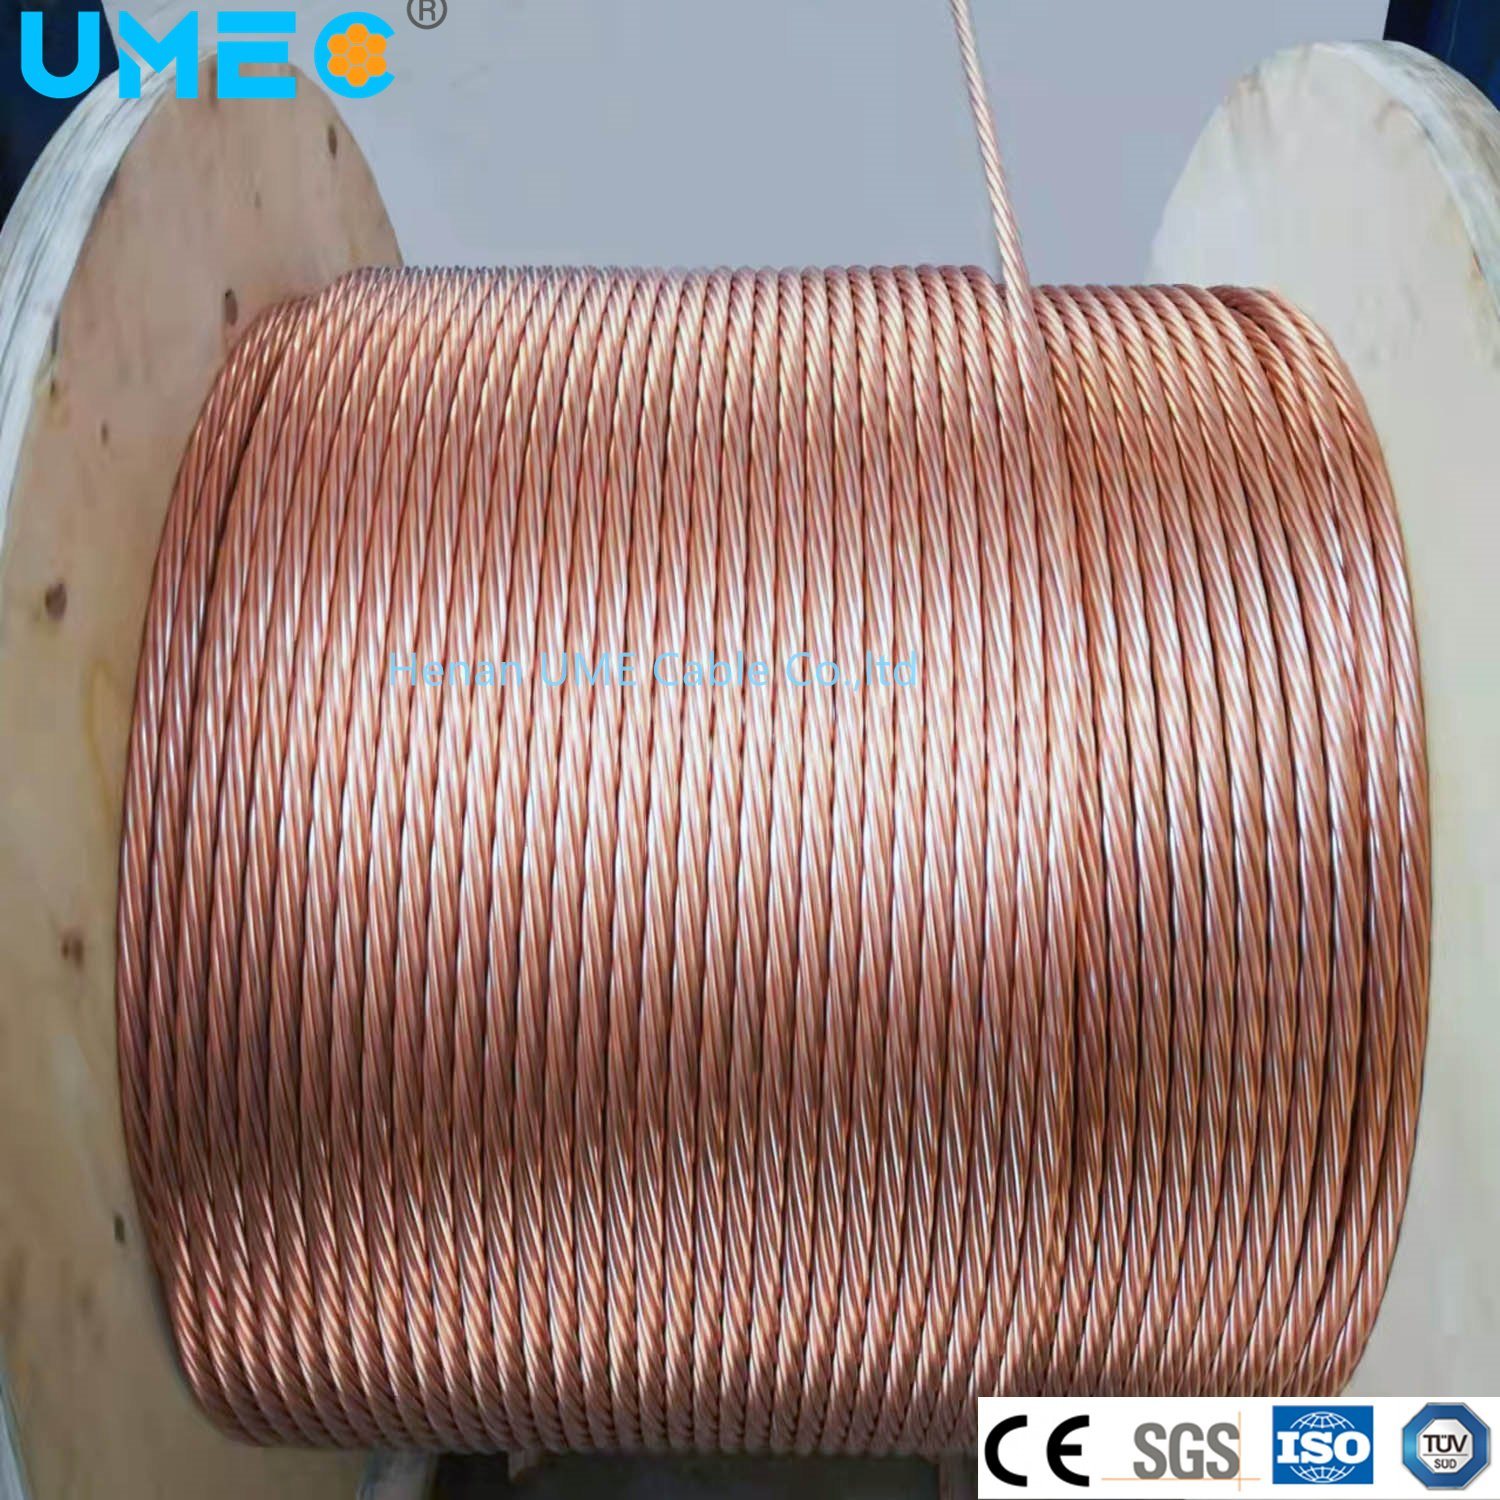 IEC 60228 Copper Conductor Bare Copper Earthing Cable